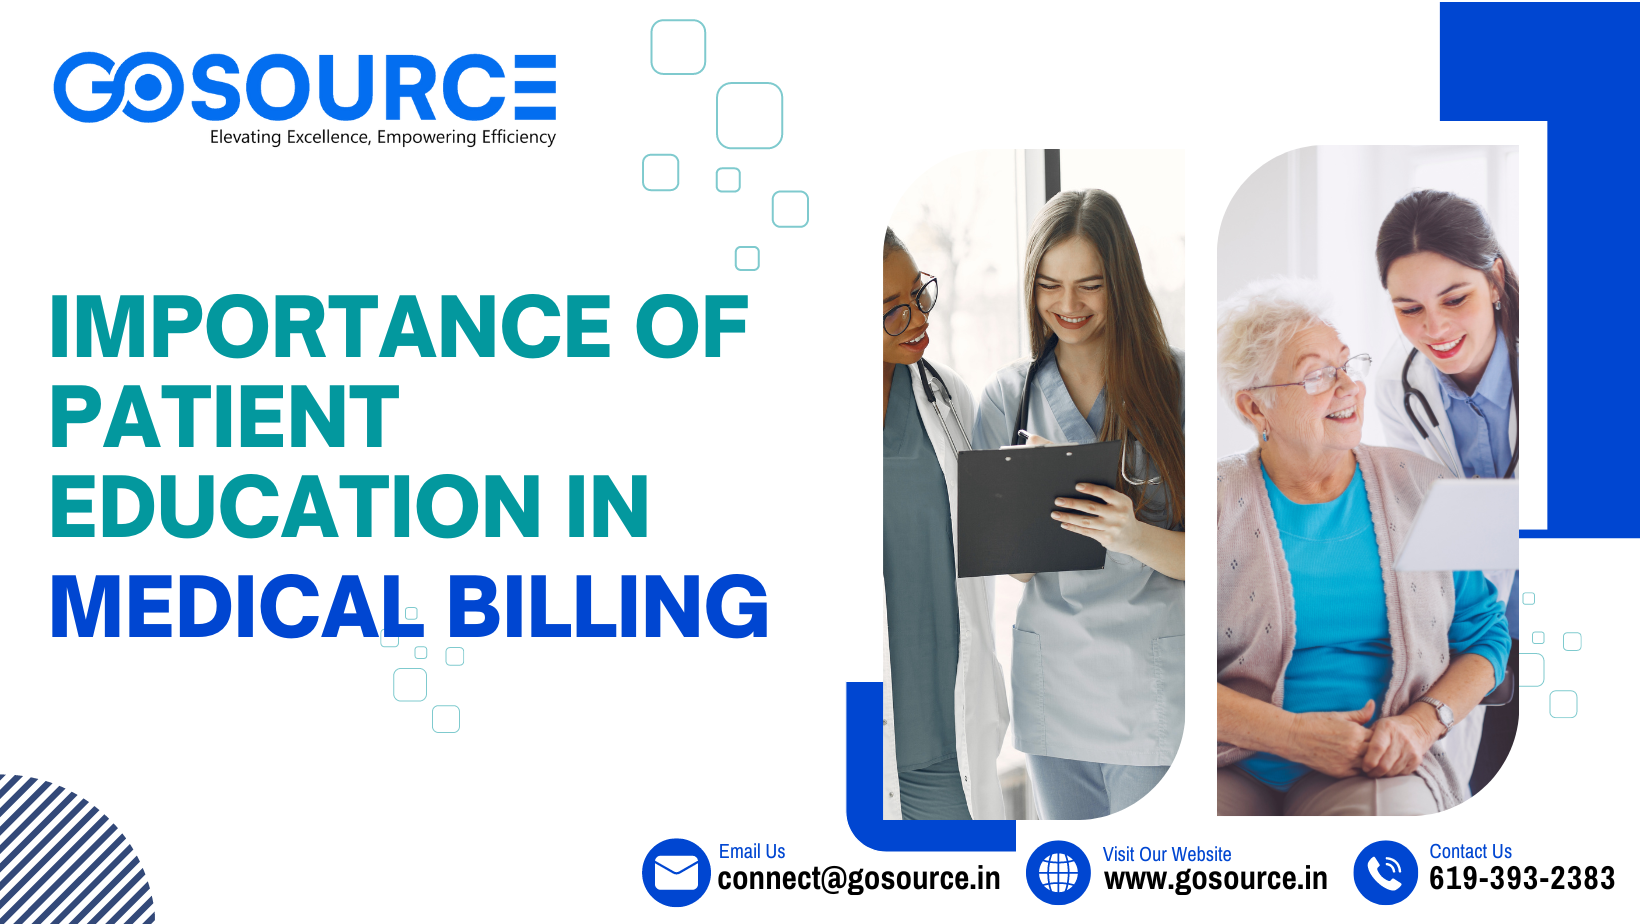 Importance of Patient Education in Medical Billing